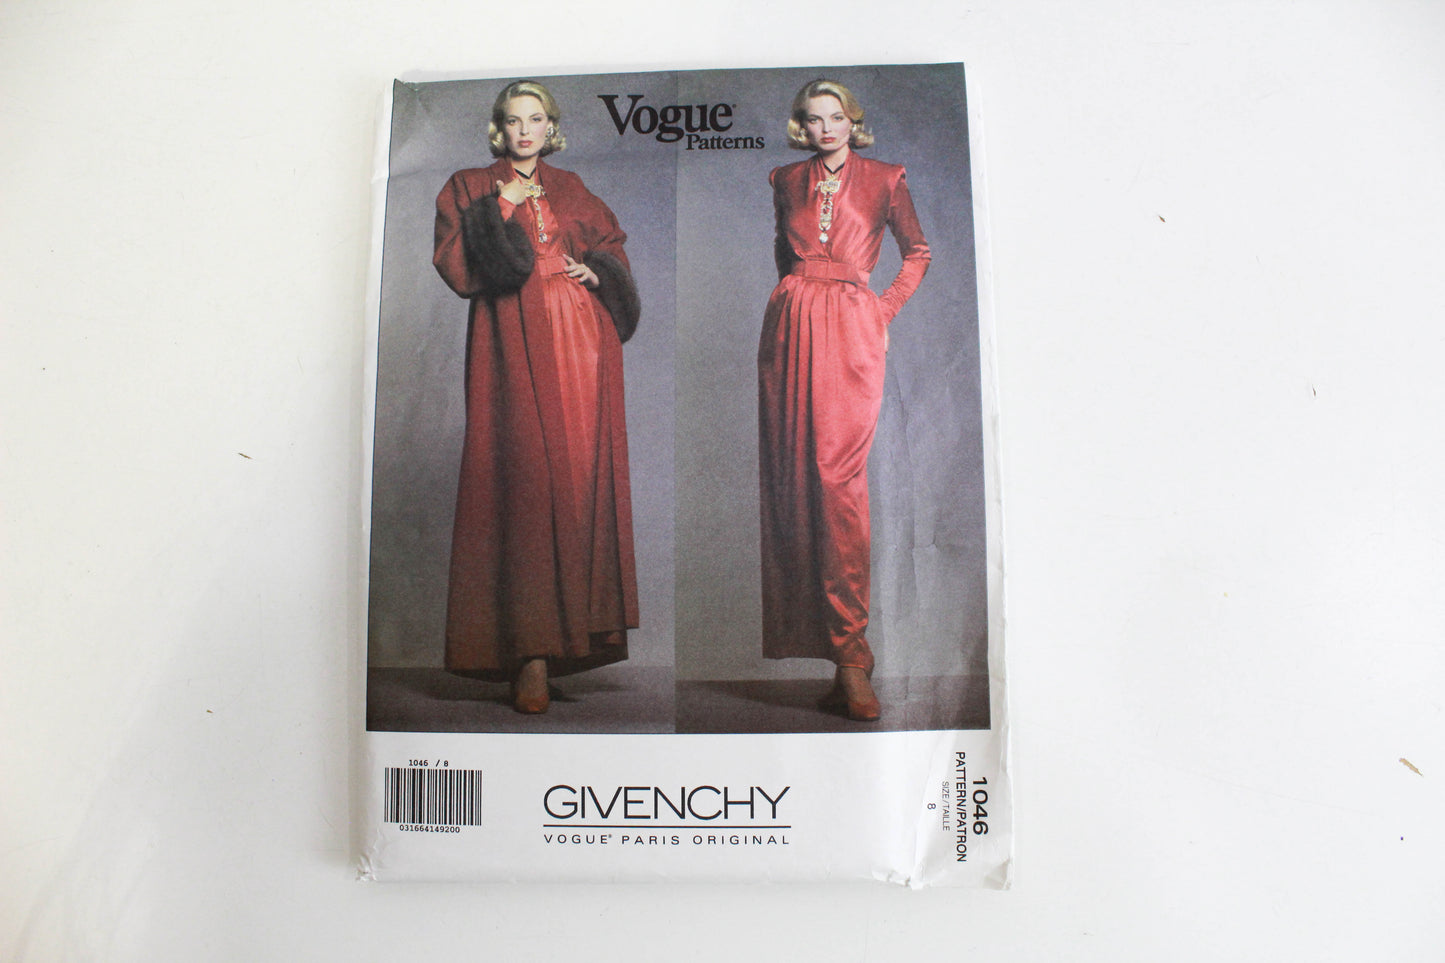 1990s givenchy sewing pattern vogue paris original 1046 evening gown dress and coat